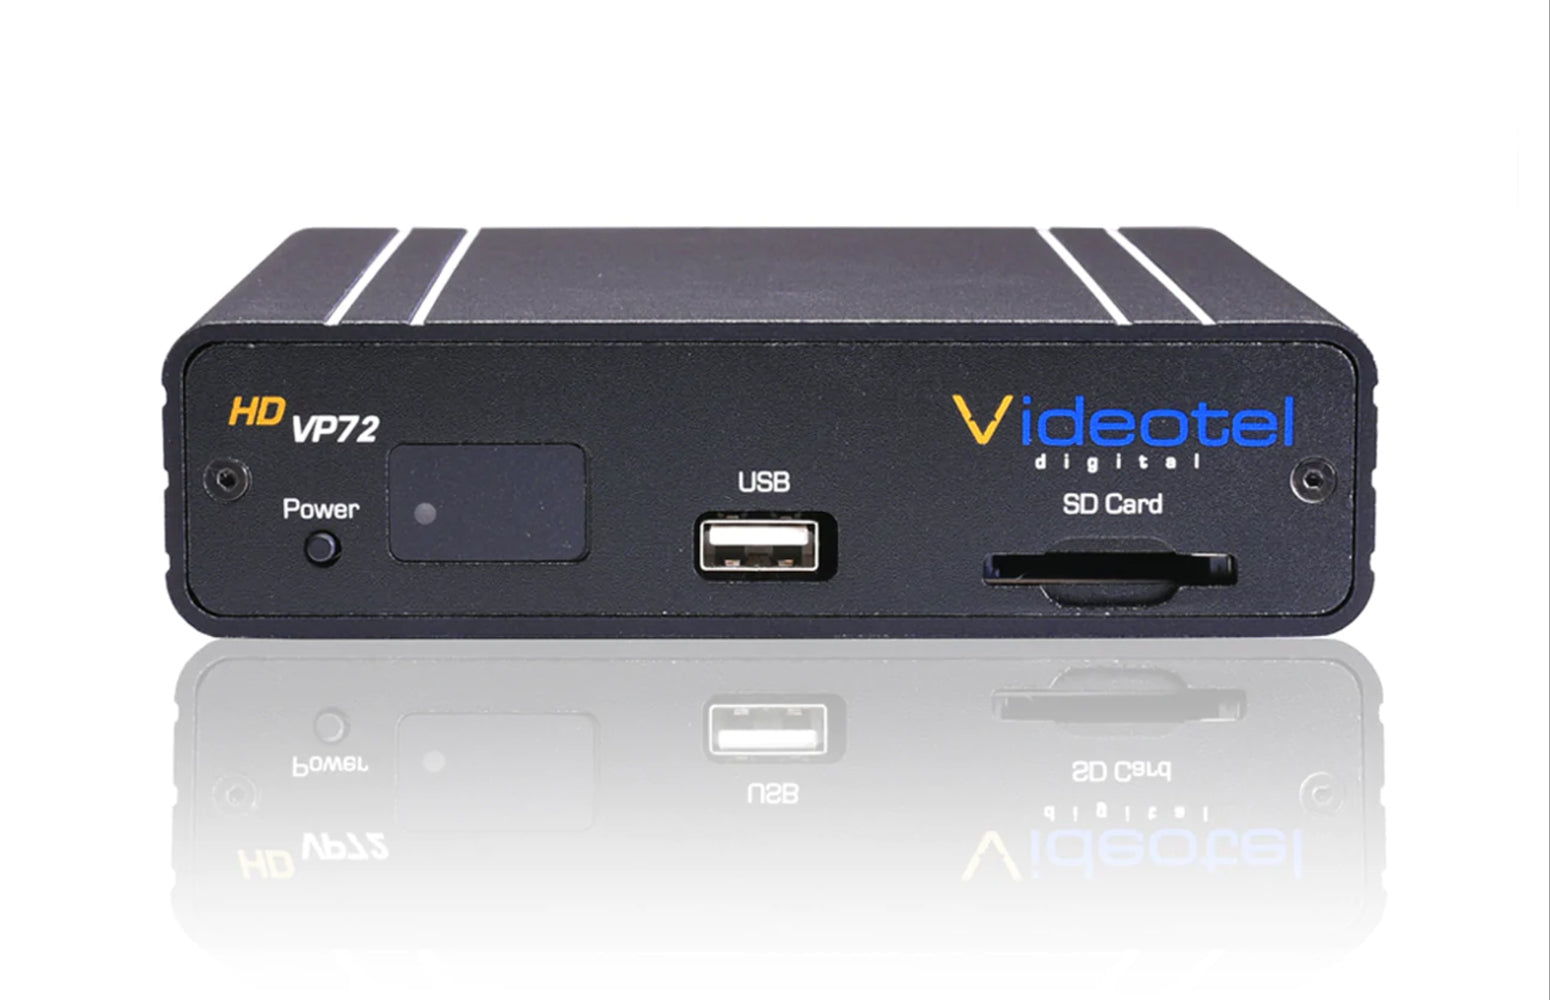 VP90 Industrial Interactive Networked Media Player